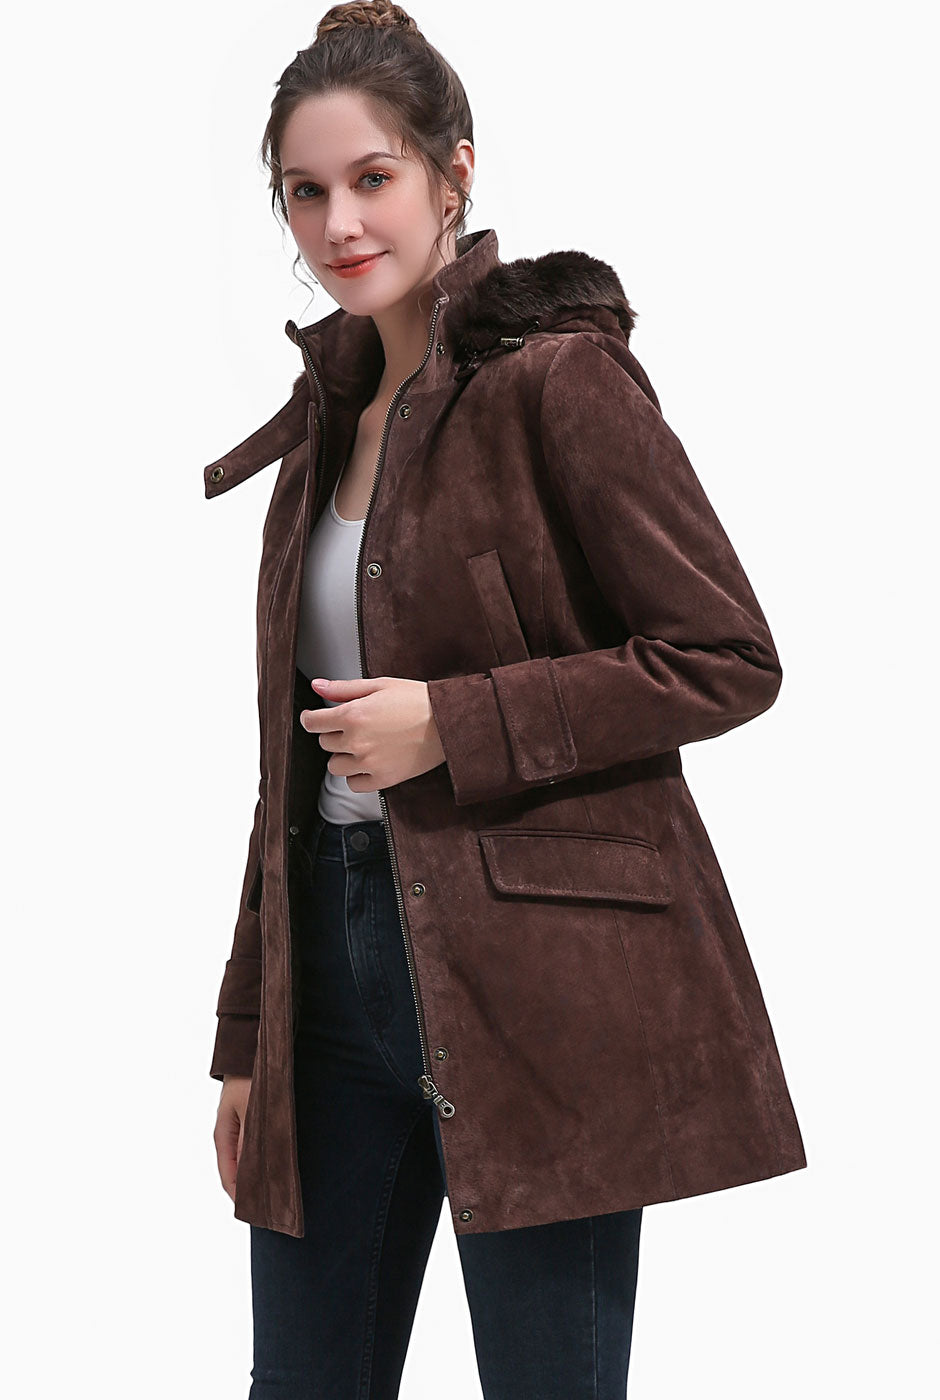 BGSD Women Della Hooded Suede Leather Parka Coat